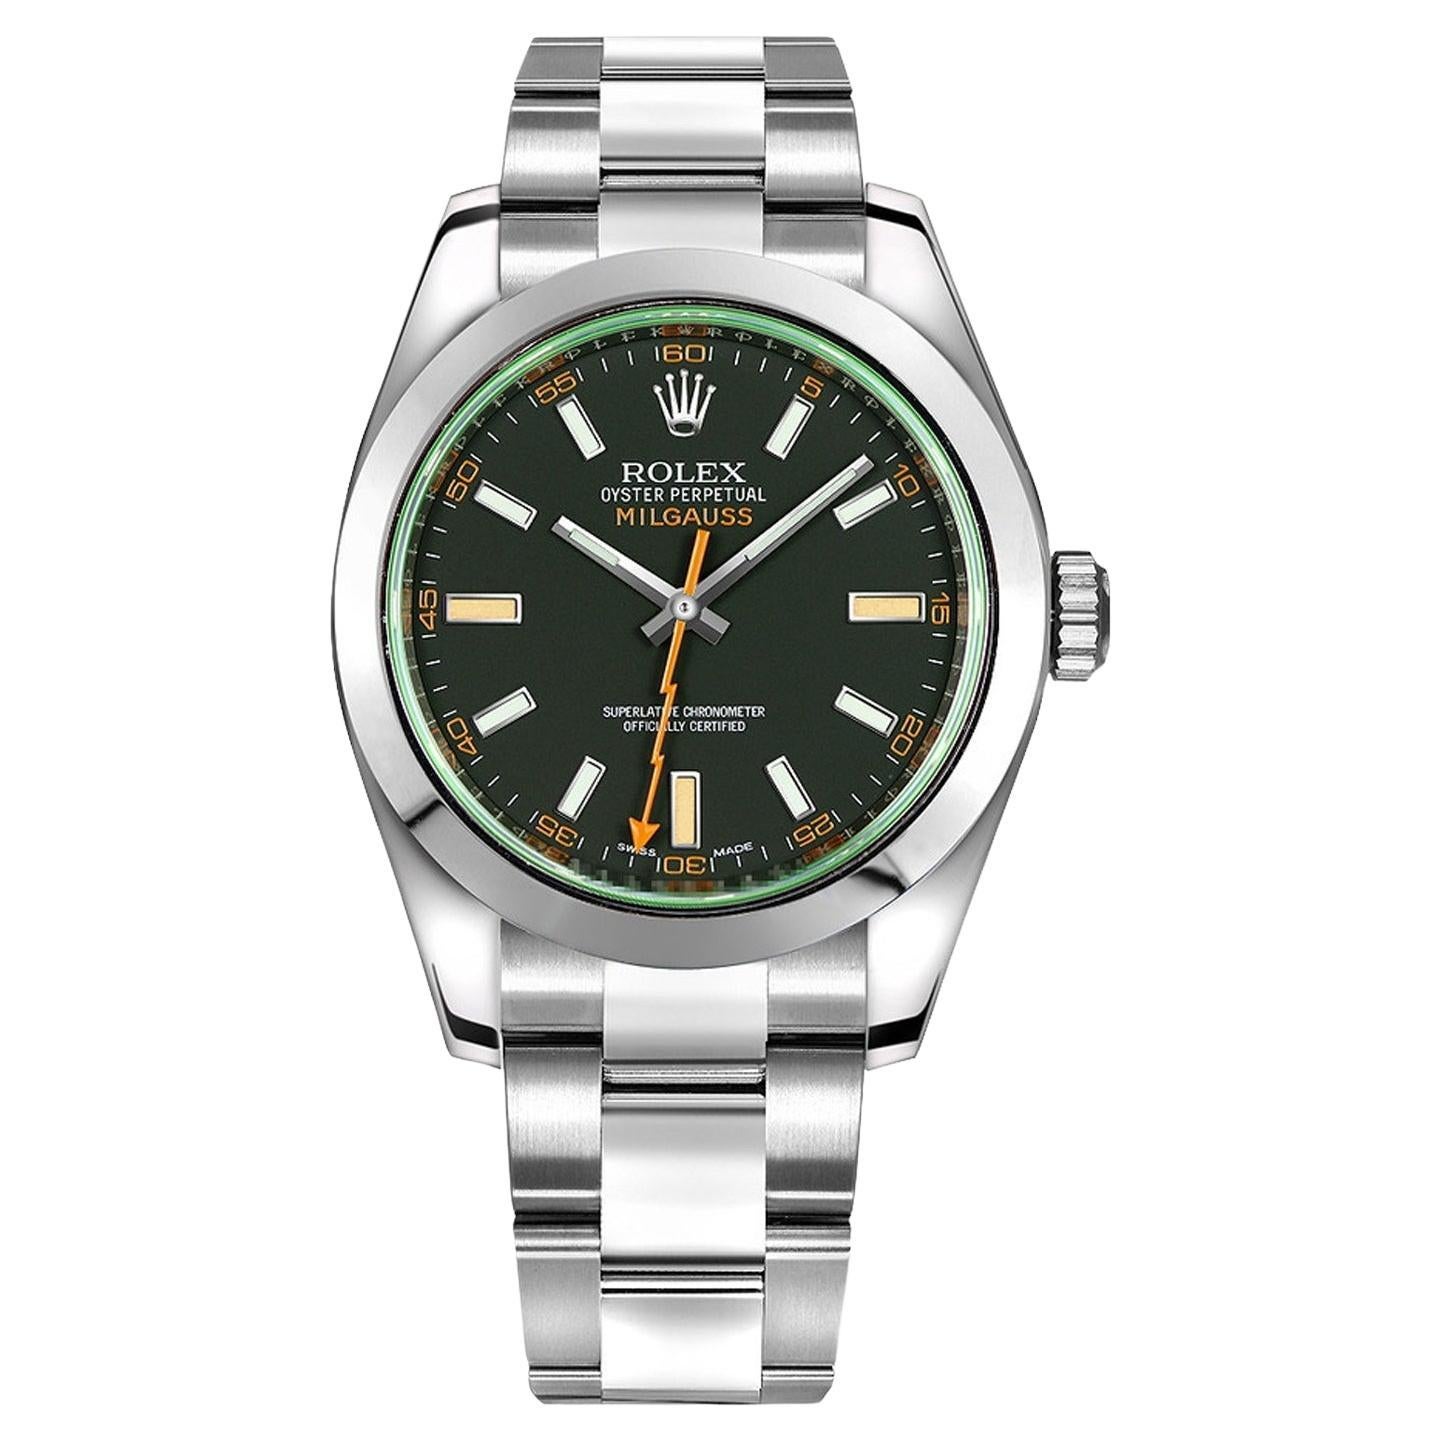 Rolex Milgauss Stainless Steel Black Dial Green Crystal Mens Watch 116400GV For Sale